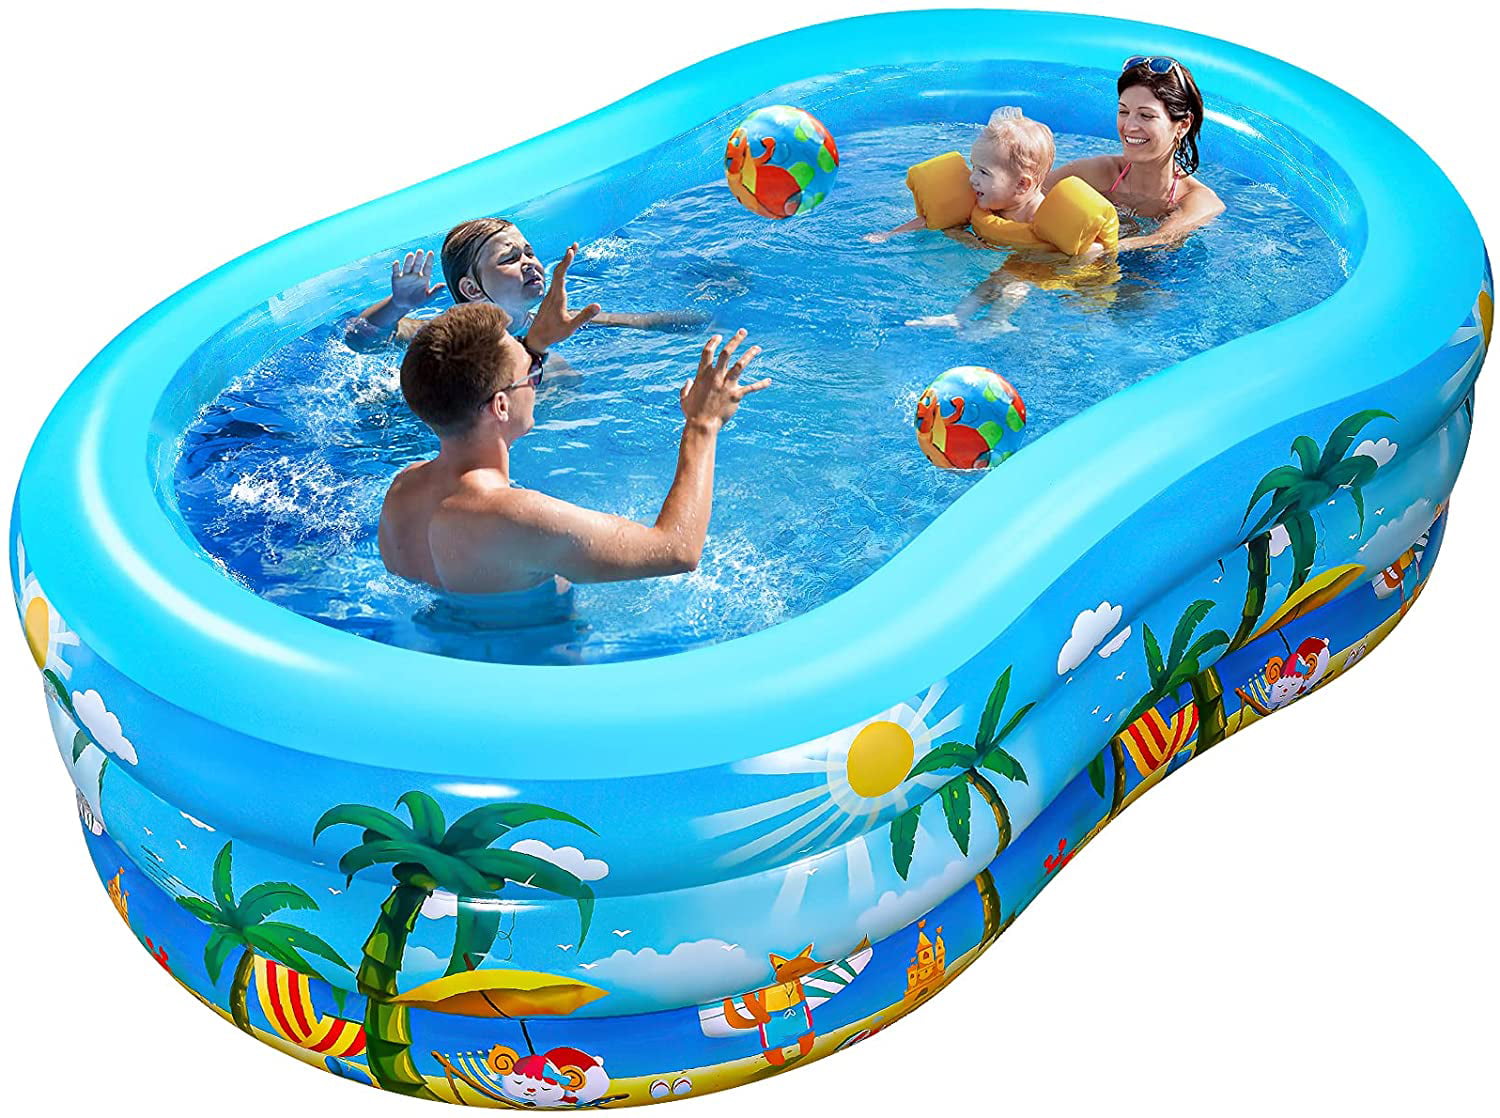 Paddling Pool Lounge Inflatable Seats Outdoor Garden Family Size Fun Swimming 